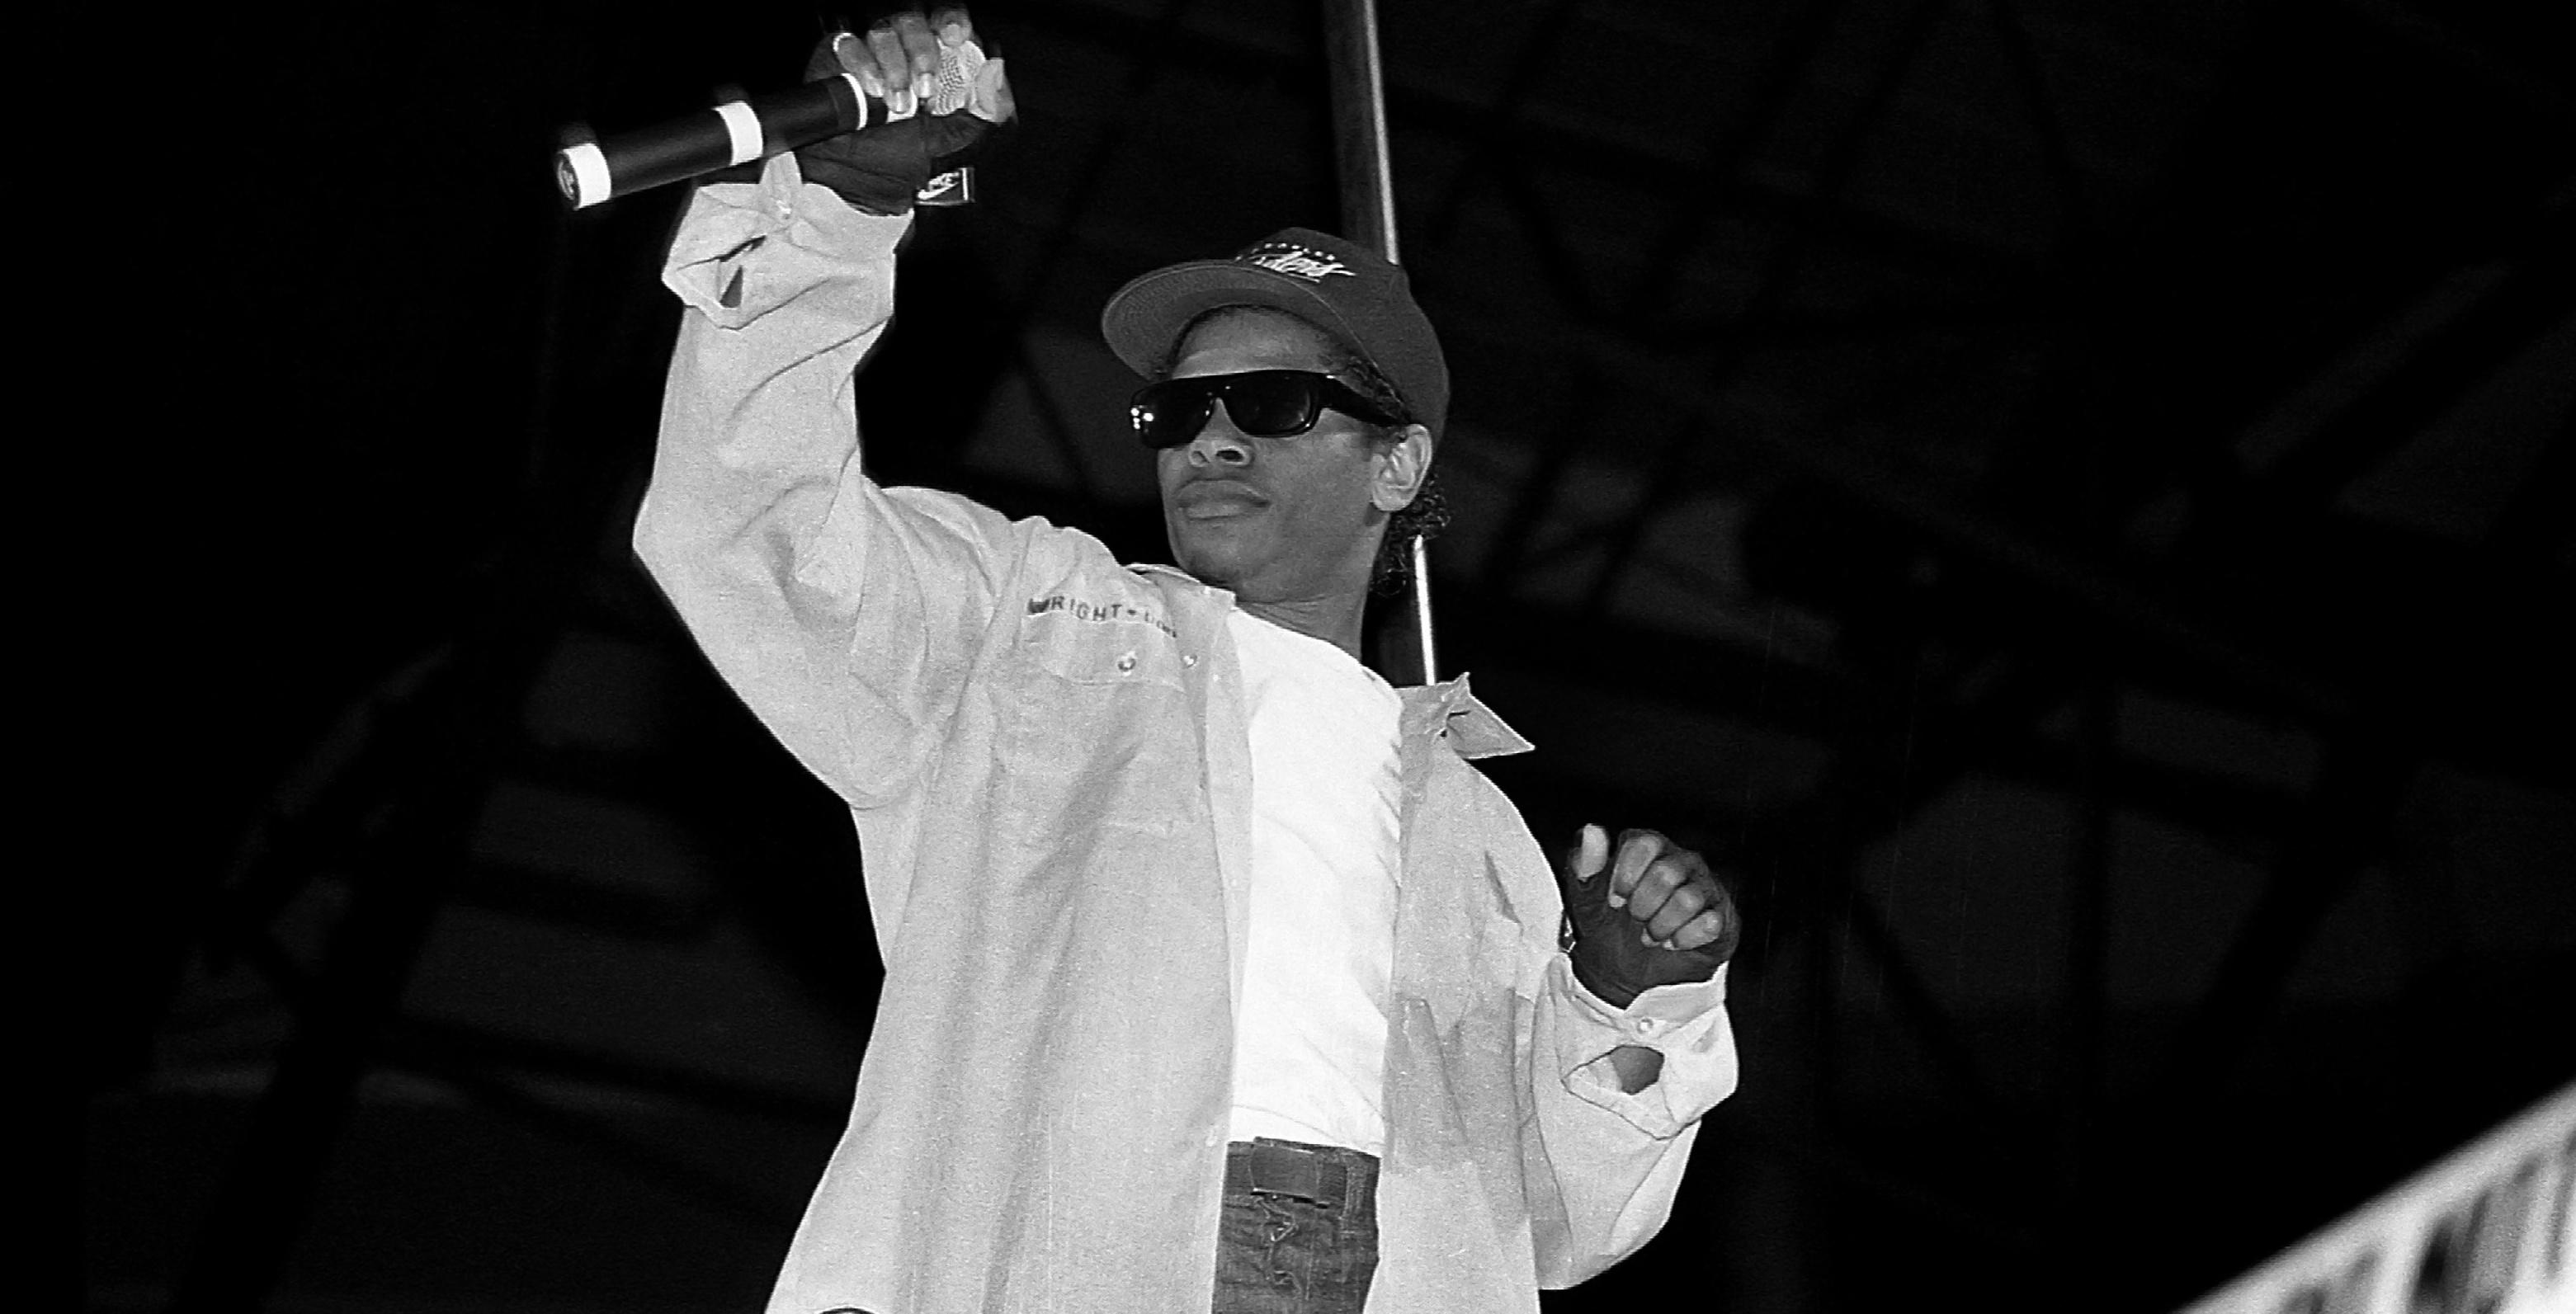 Eazy-E from N.W.A. performs during the 'Straight Outta Compton' tour